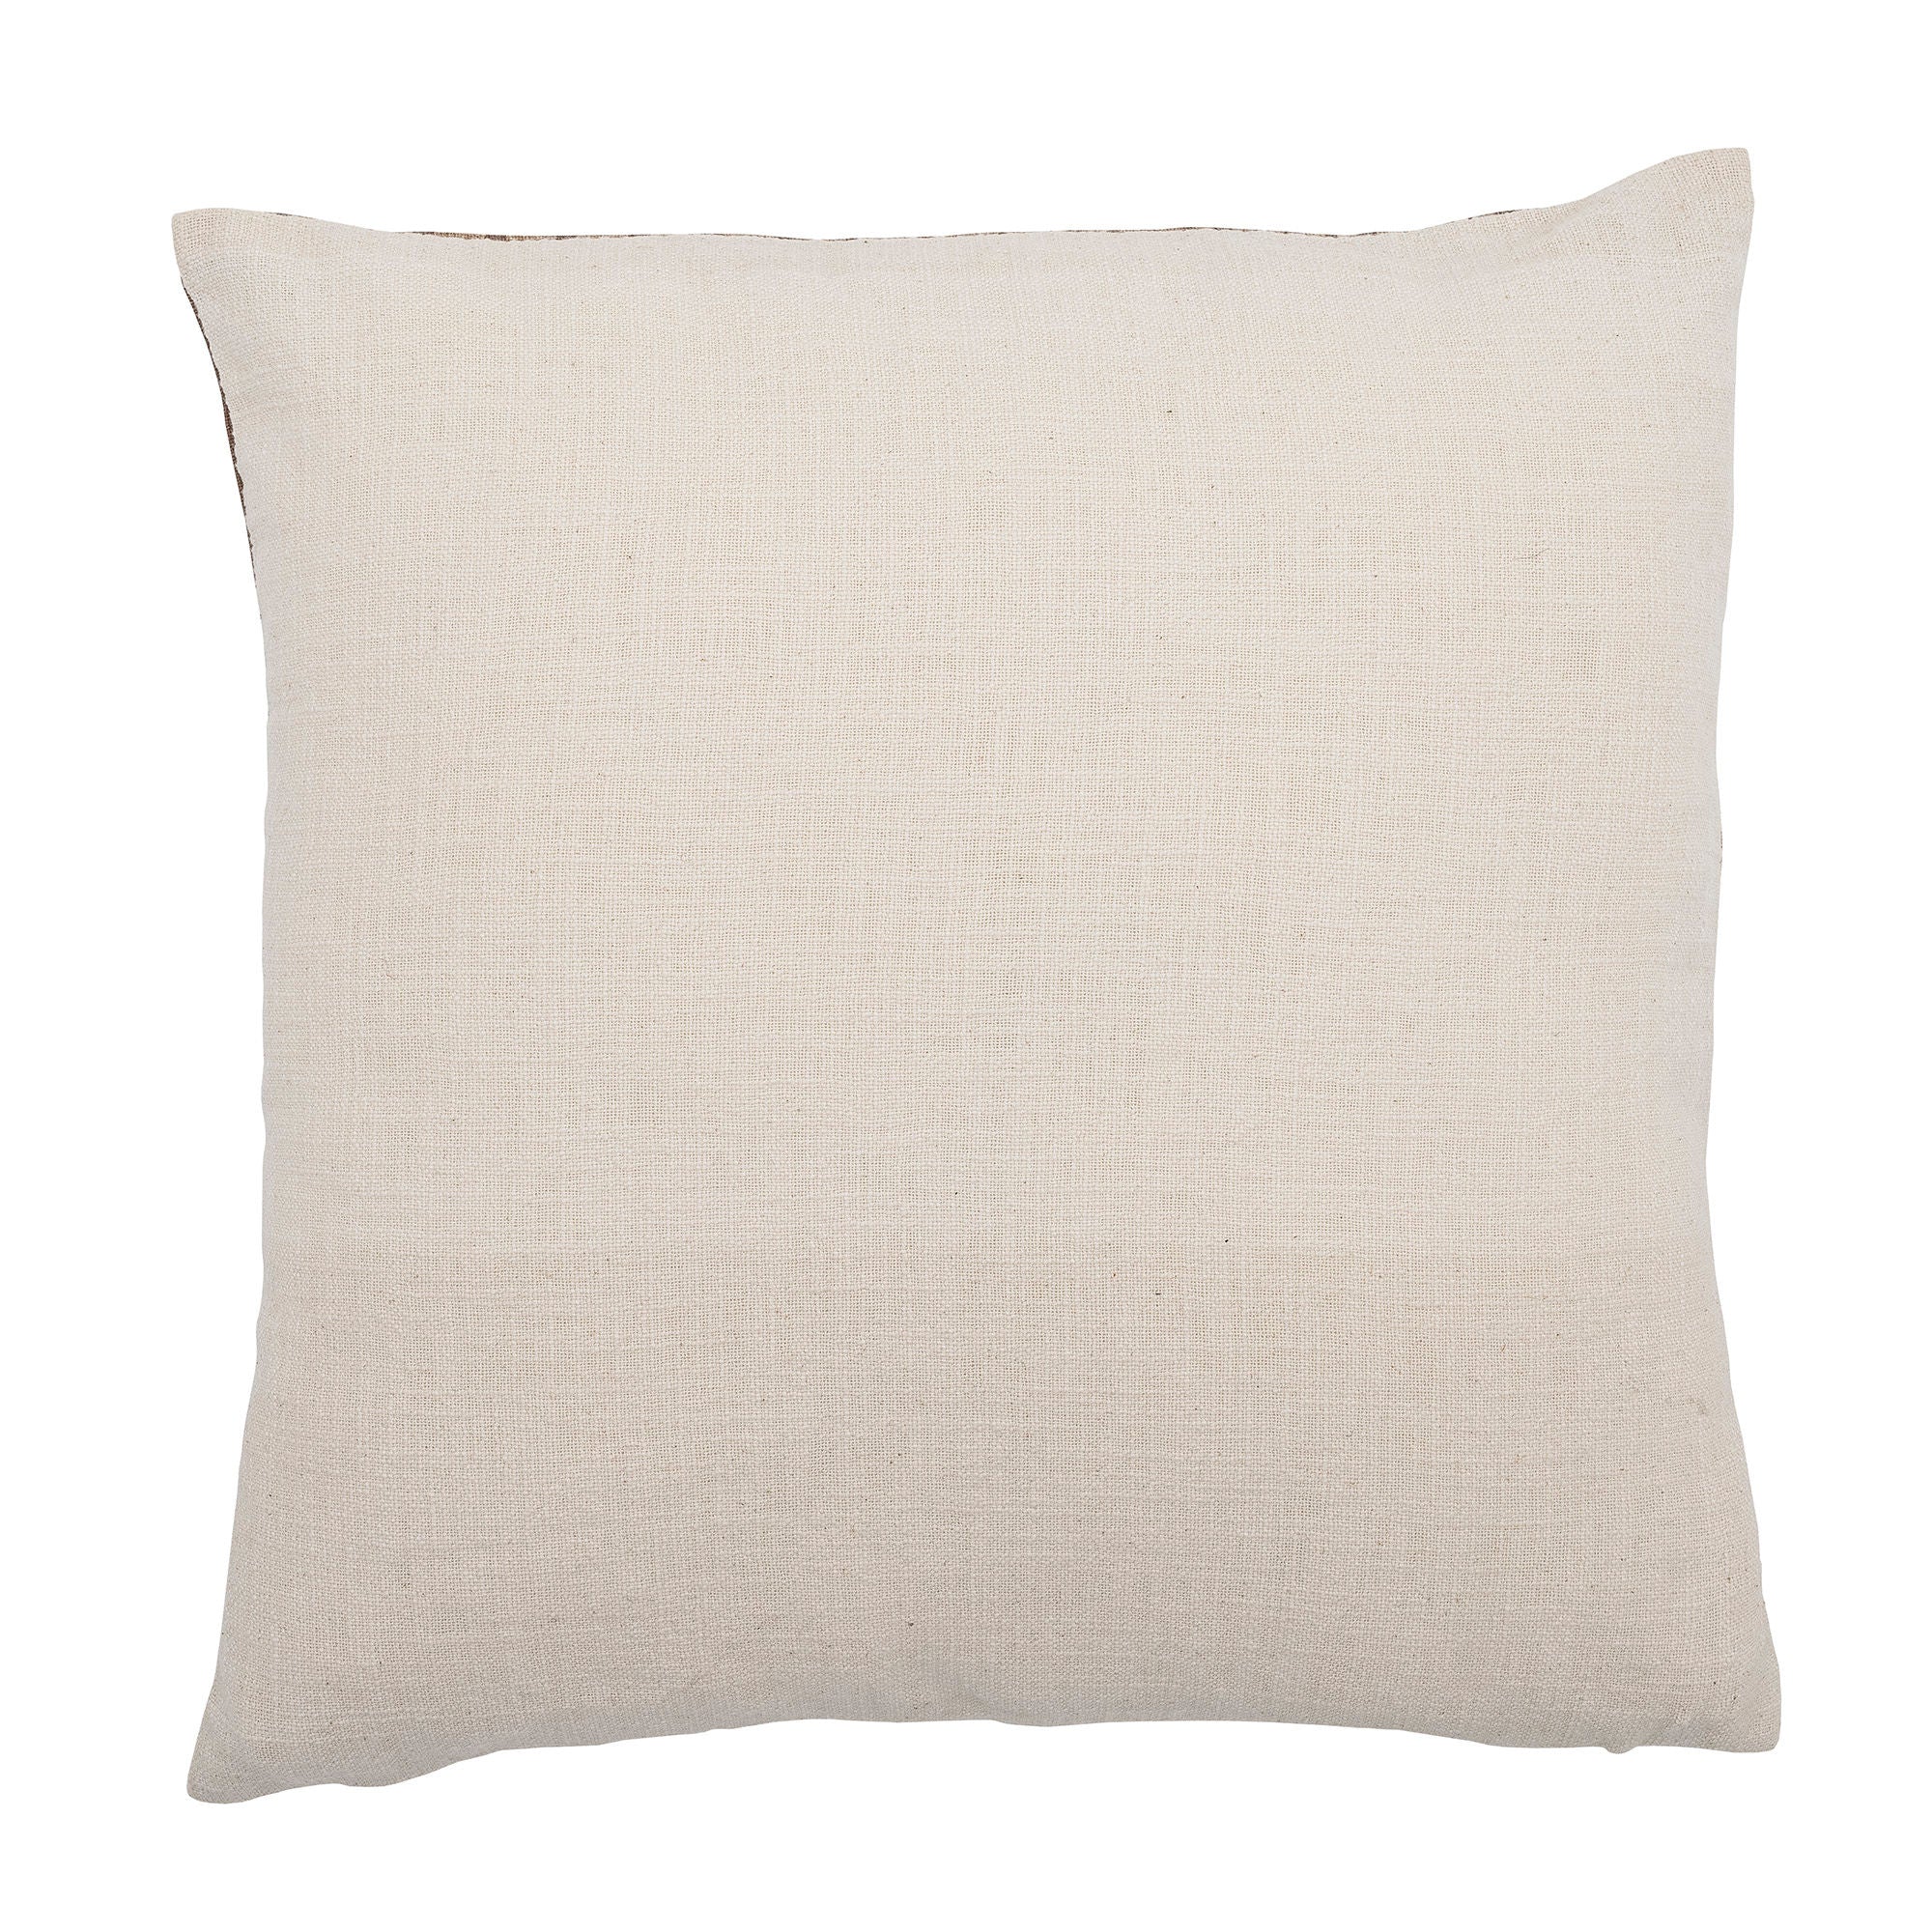 Bloomingville Witham Cushion, Brown, Cotton